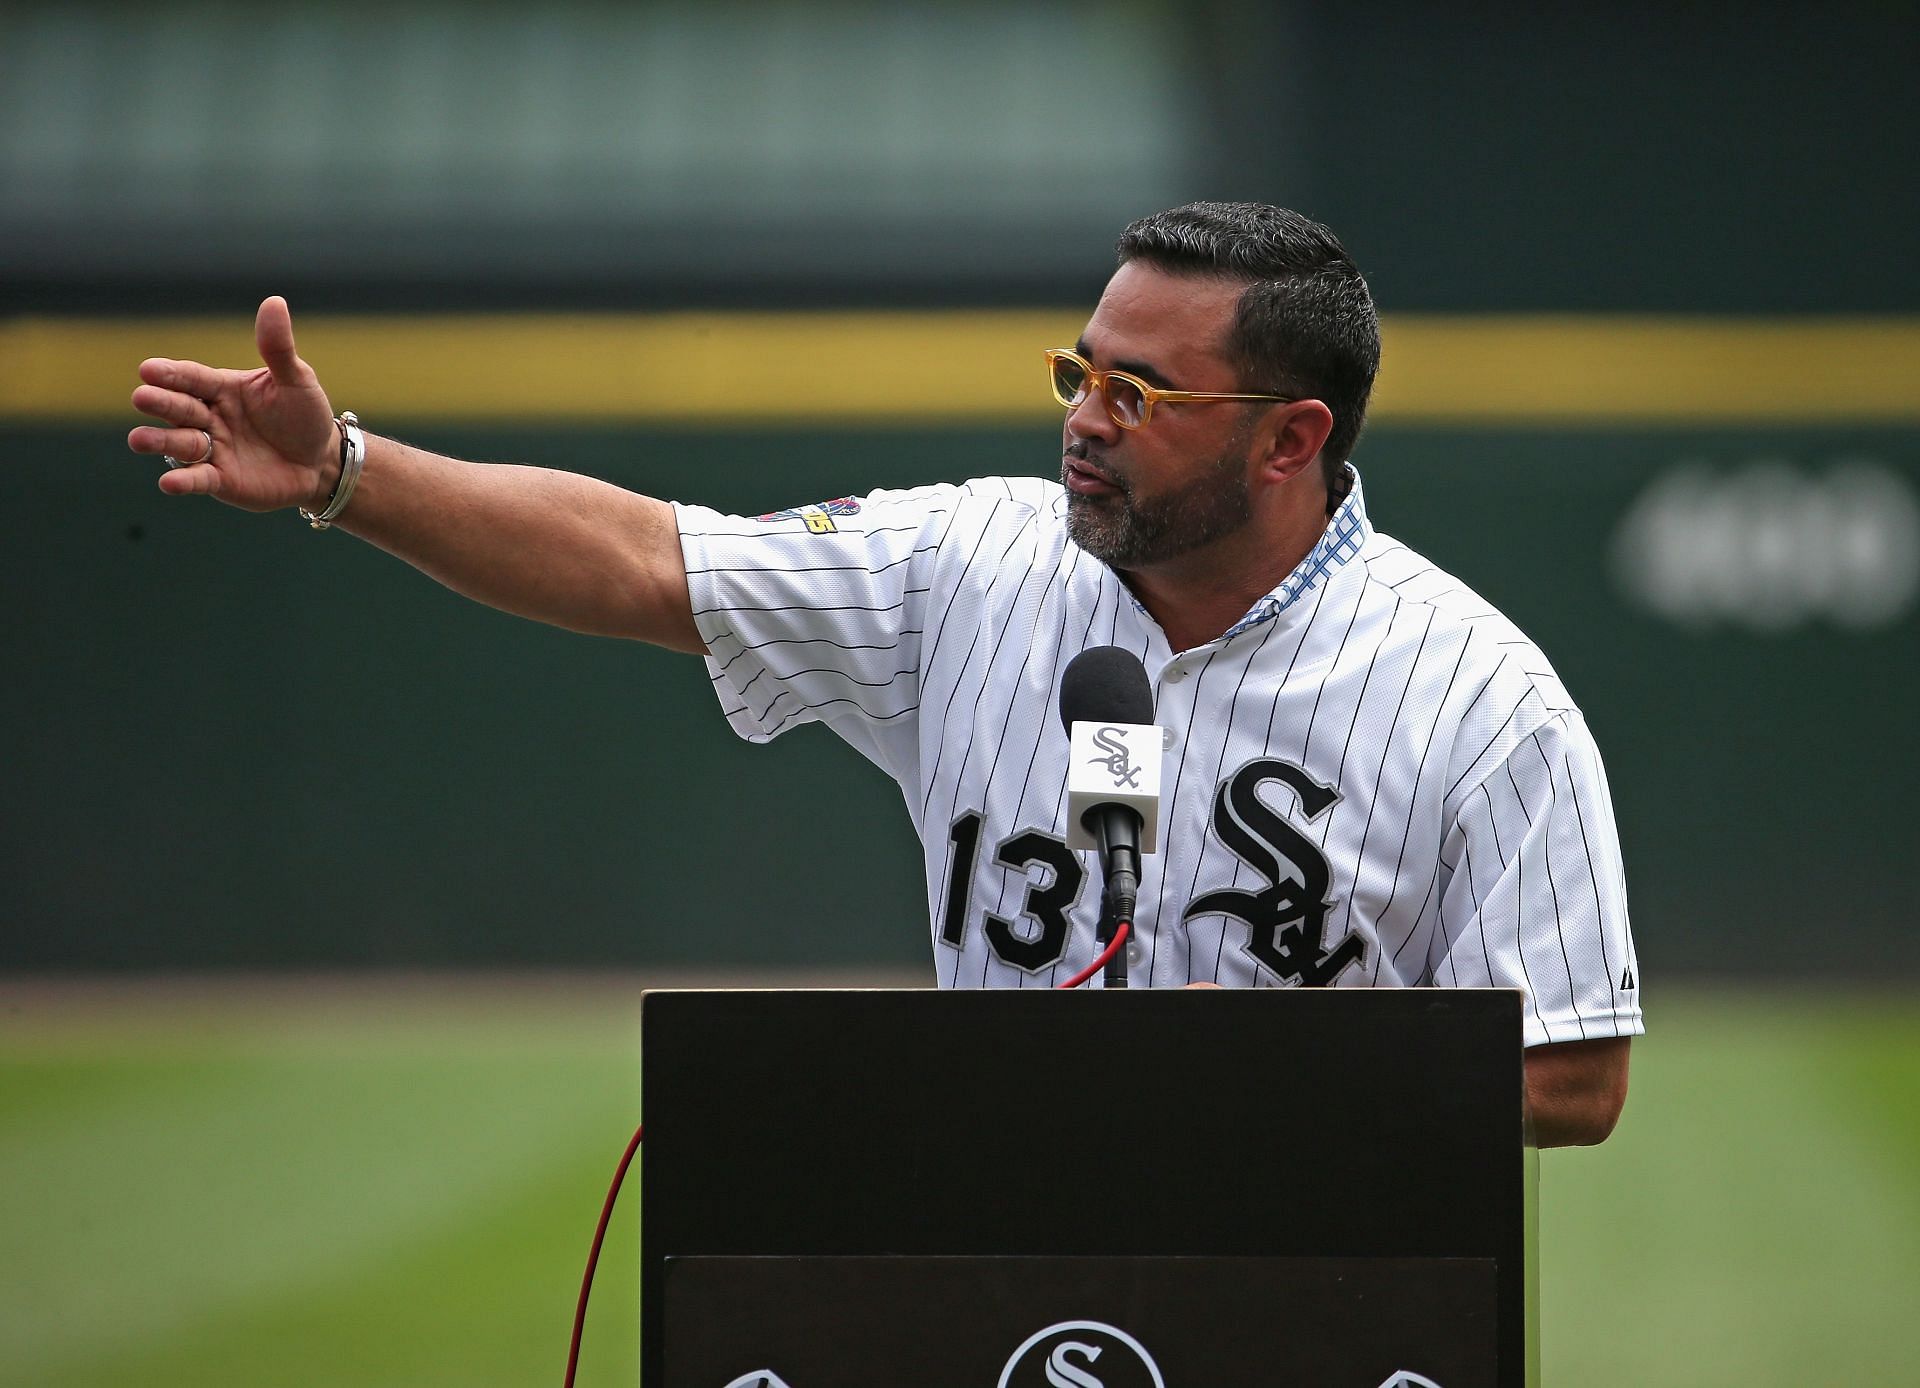 Ozzie Guillen Returns to the Dugout After Suspension - The New